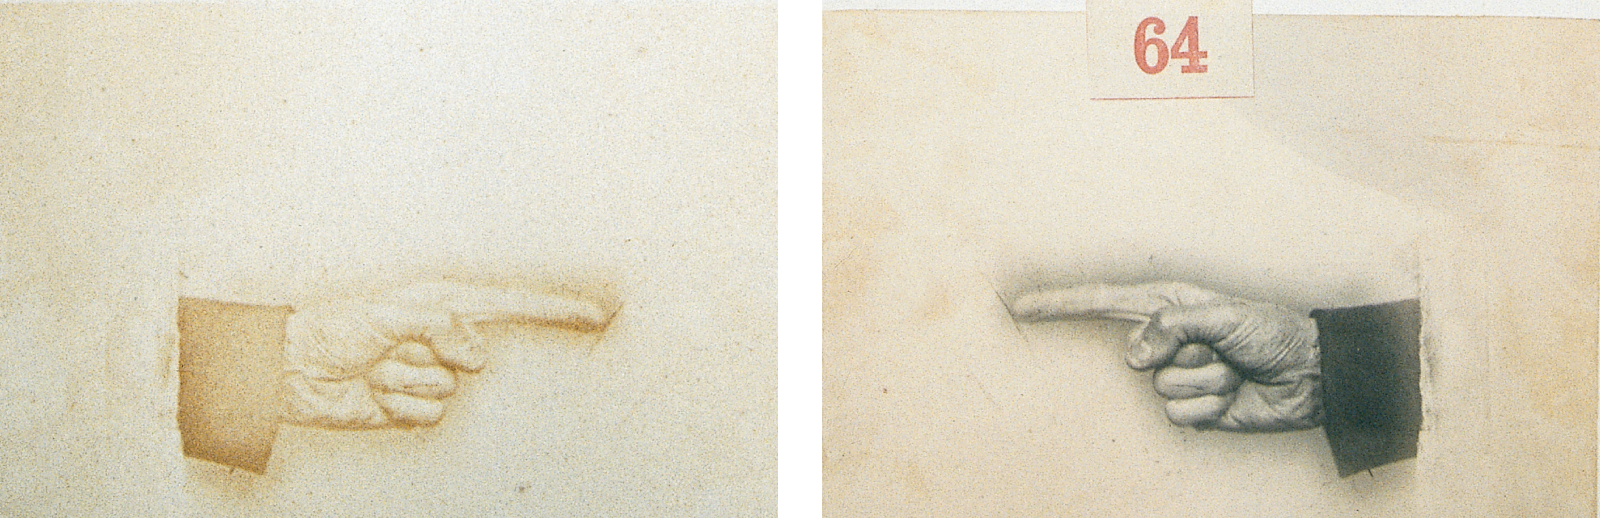 Two adjacent pages from “The Album of Unwritten Work.” On the right is a photograph depicting a disembodied hand performing a secret gesture, and on the facing page is the ghostly mirror image of the hand, which has been produced by a chemical reaction.